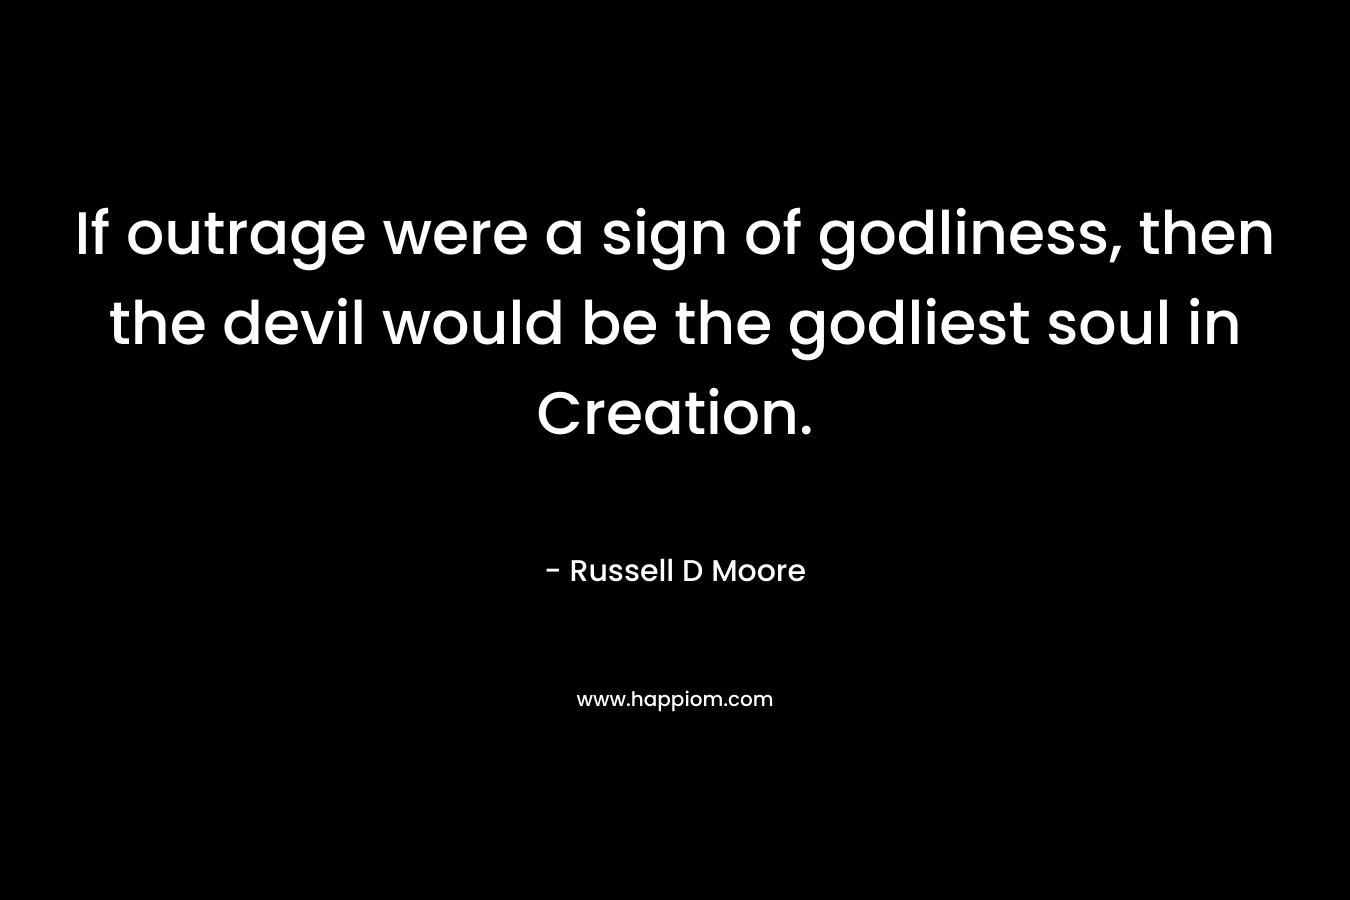 If outrage were a sign of godliness, then the devil would be the godliest soul in Creation. – Russell D Moore